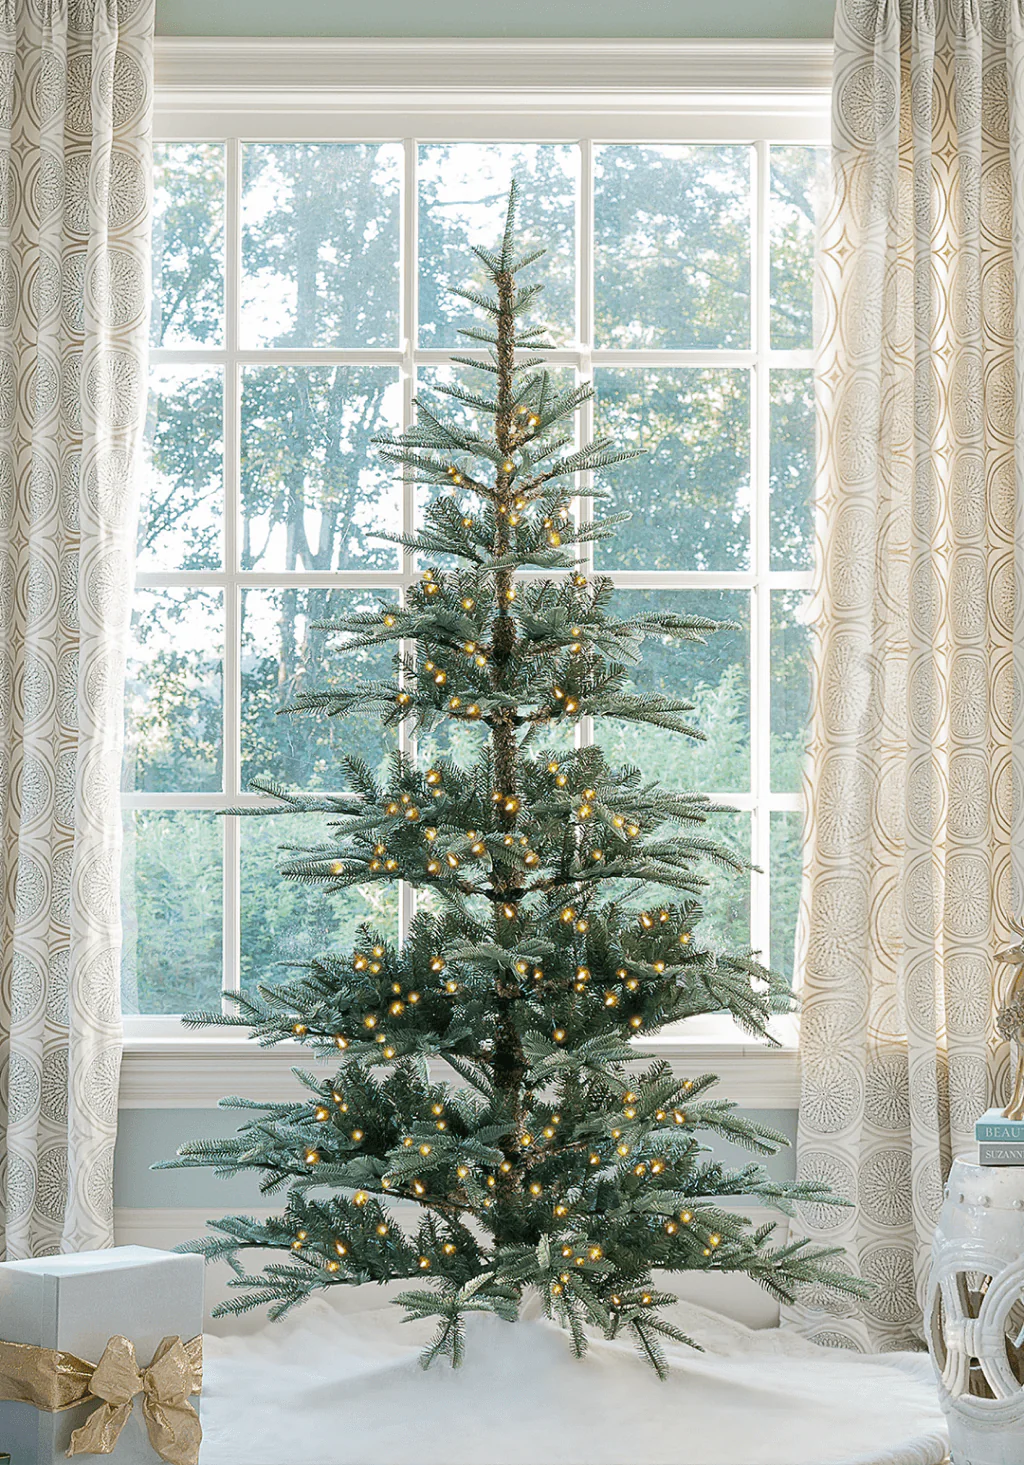 fake Christmas tree buying guide noble fir